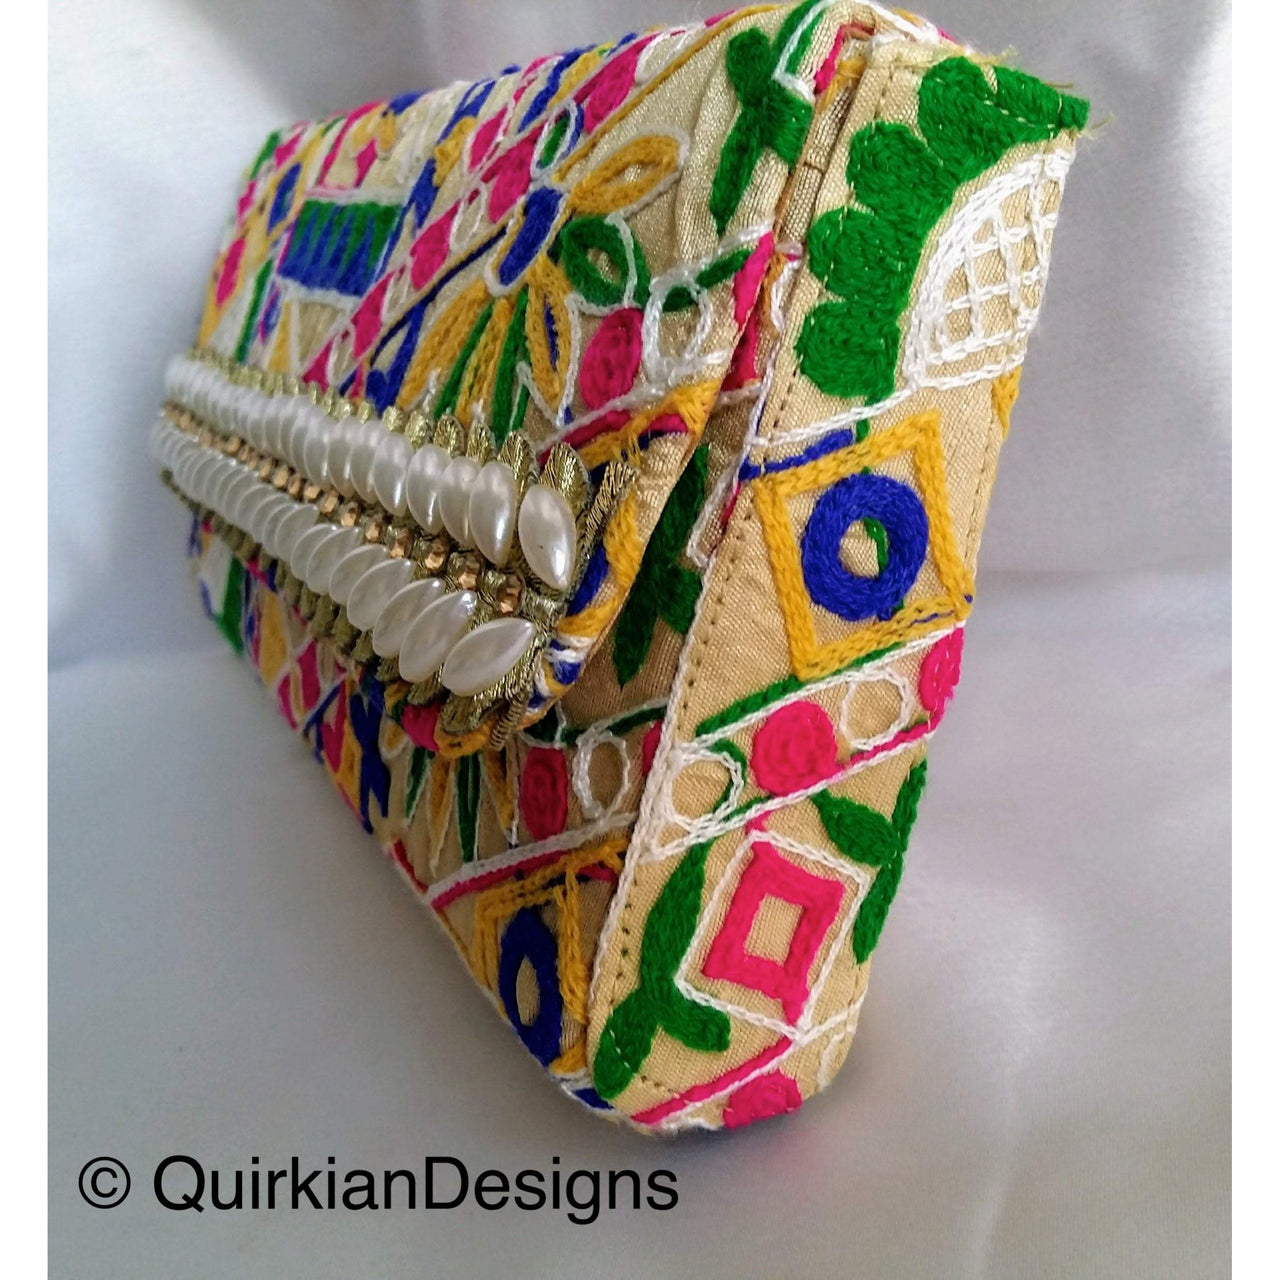 Beige Fabric Clutch Purse With Floral Embroidery In Green, Yellow, Blue And Pink & Pearl Beads Detail, Wedding Clutch, Boho Clutch